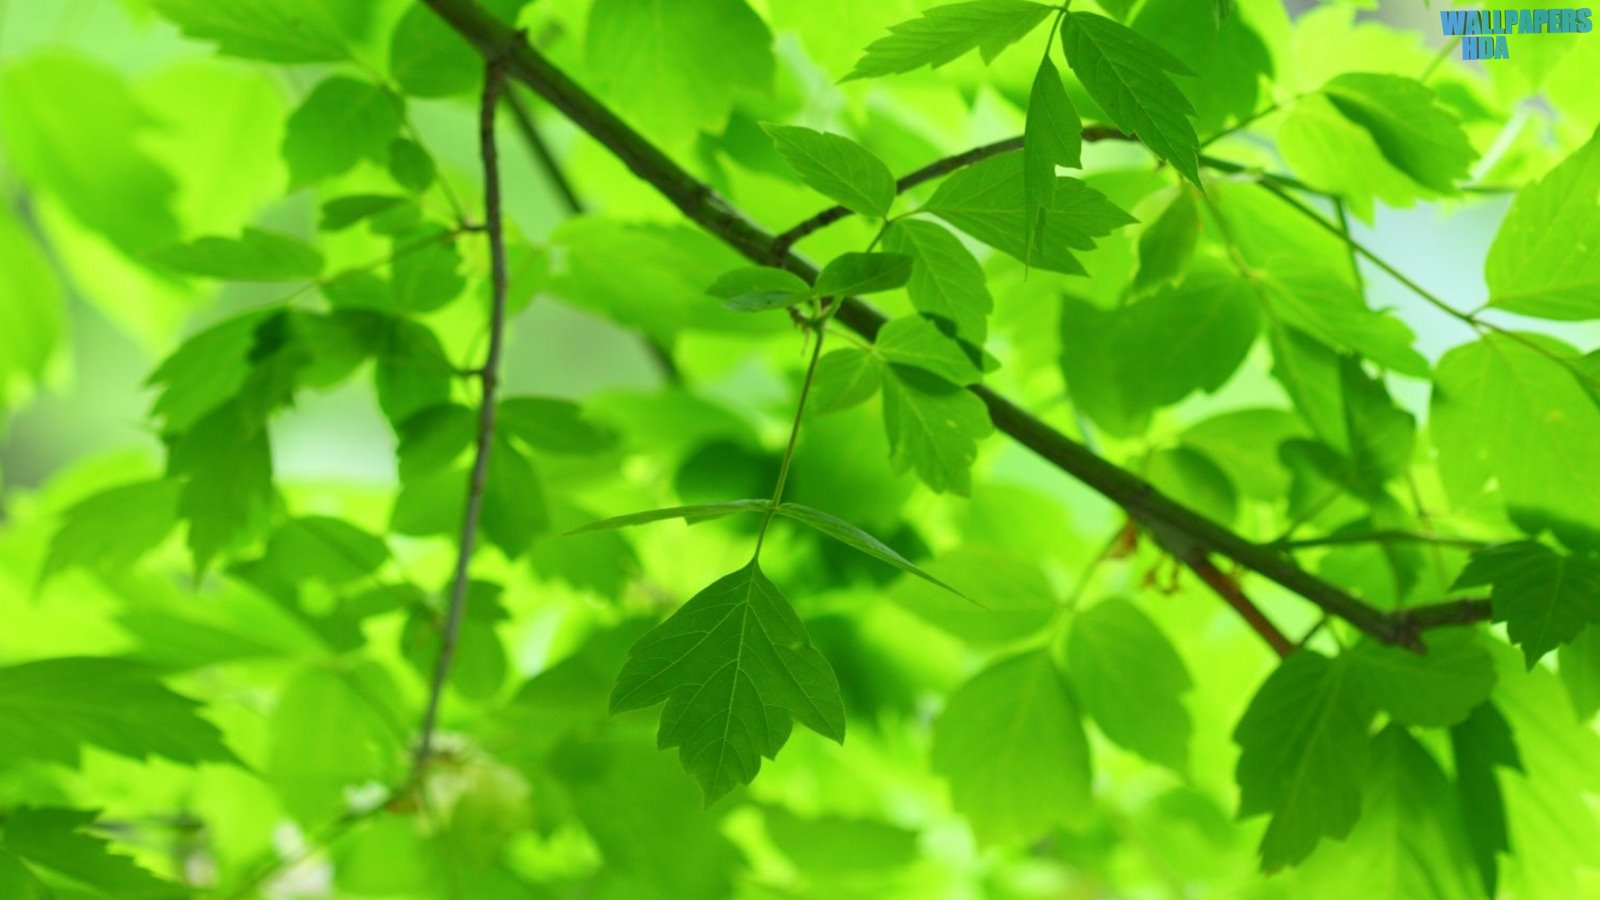 Green leaves and branches wallpaper 1600x900